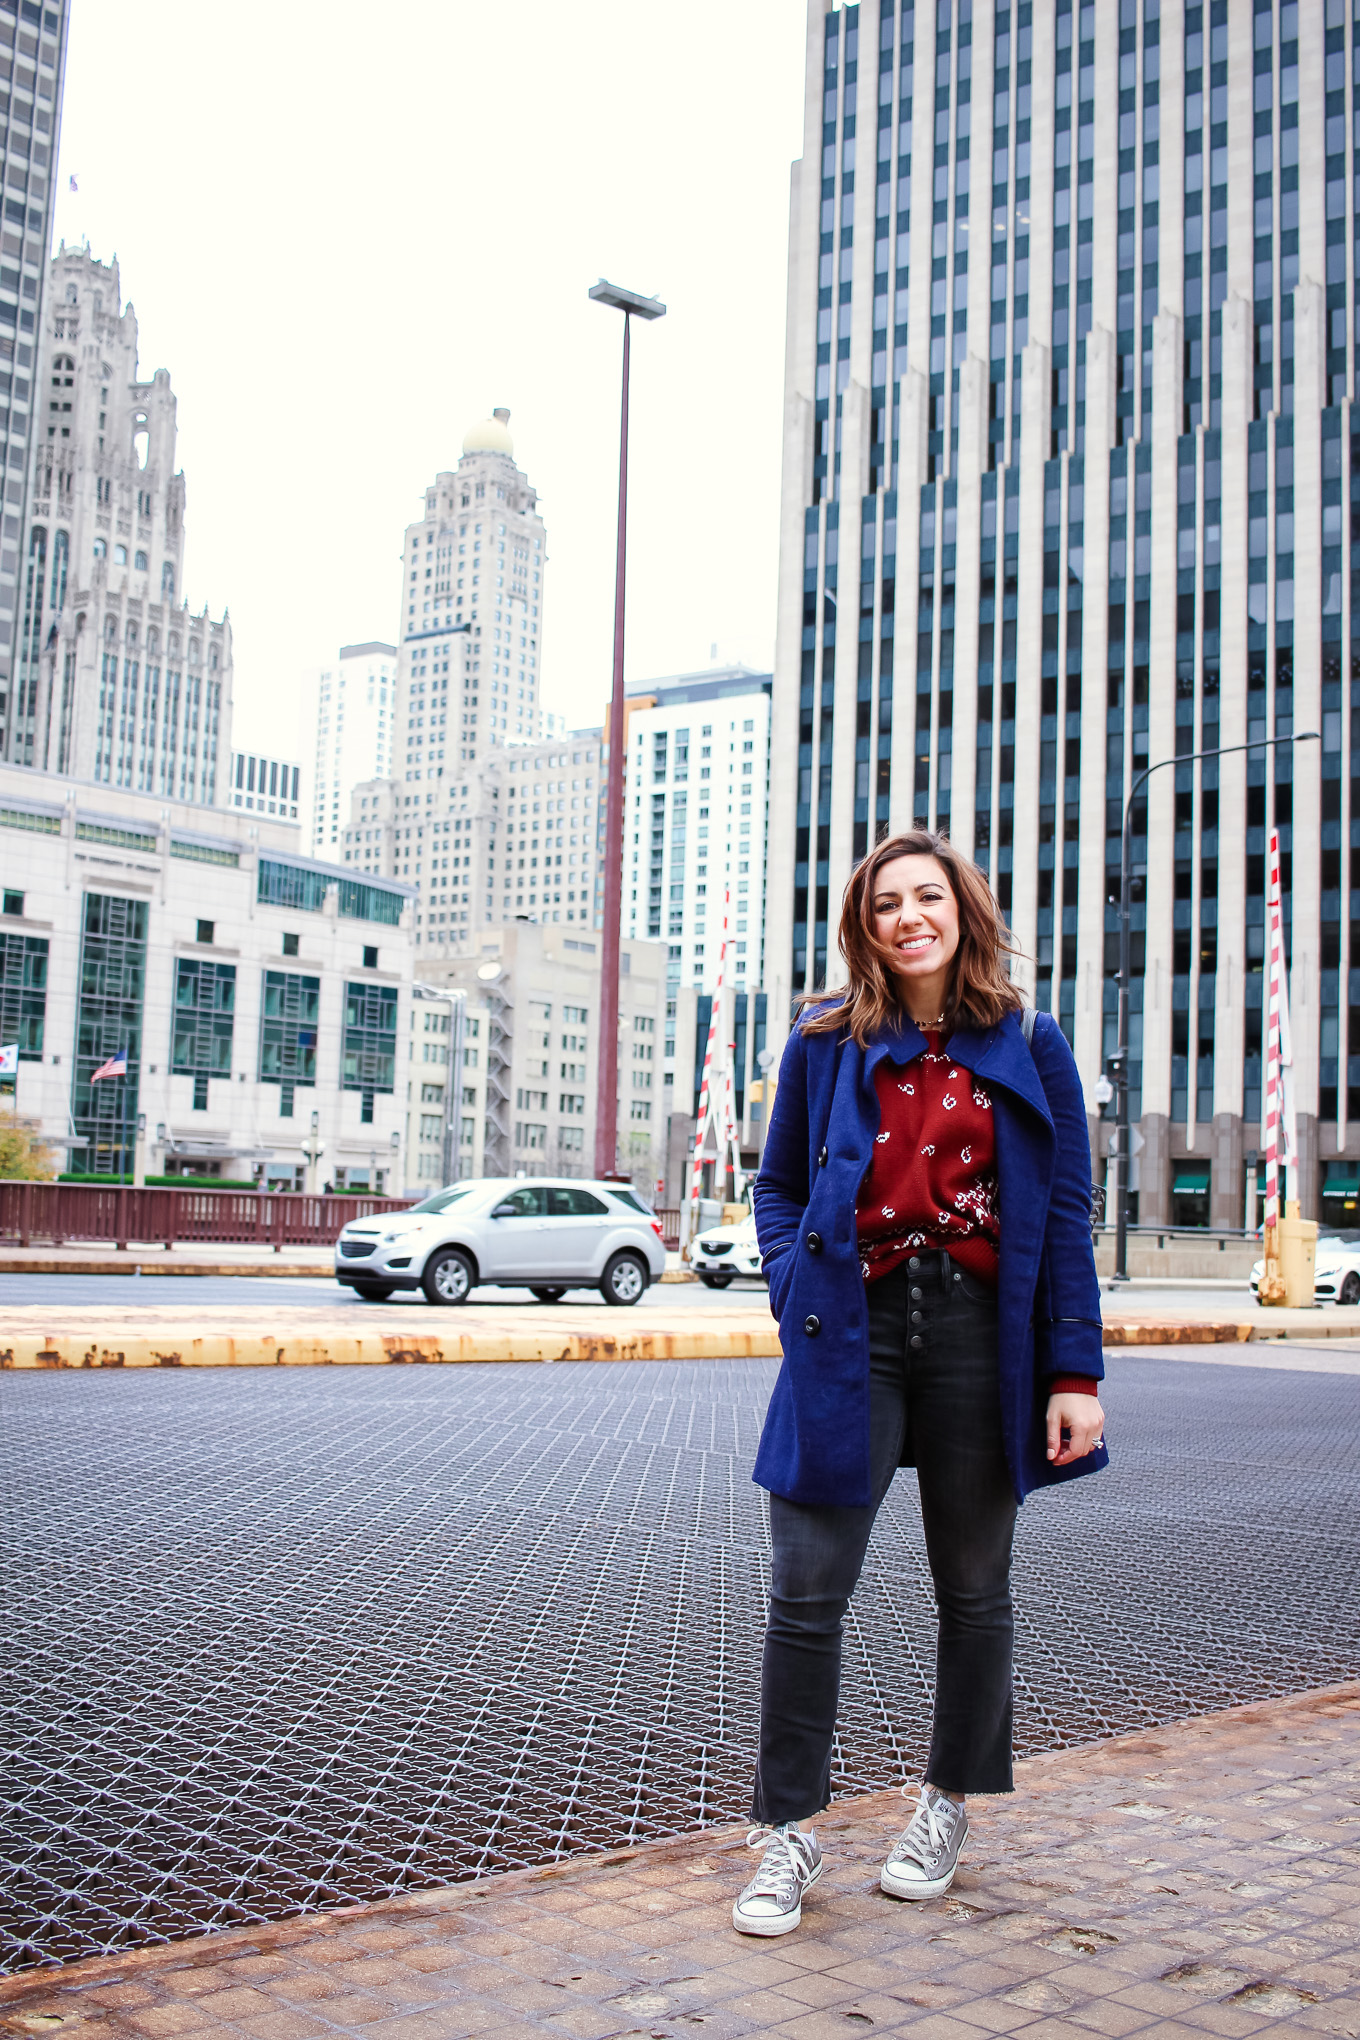 Lifestyle blogger Roxanne of Glass of Glam wearing a Madewell cropped denim, Madewell sweater, converse, a Goyard handbag, and a blue peacoat - Ain't No Party Like A Cropped Denim Party by popular Chicago fashion blogger Glass of Glam